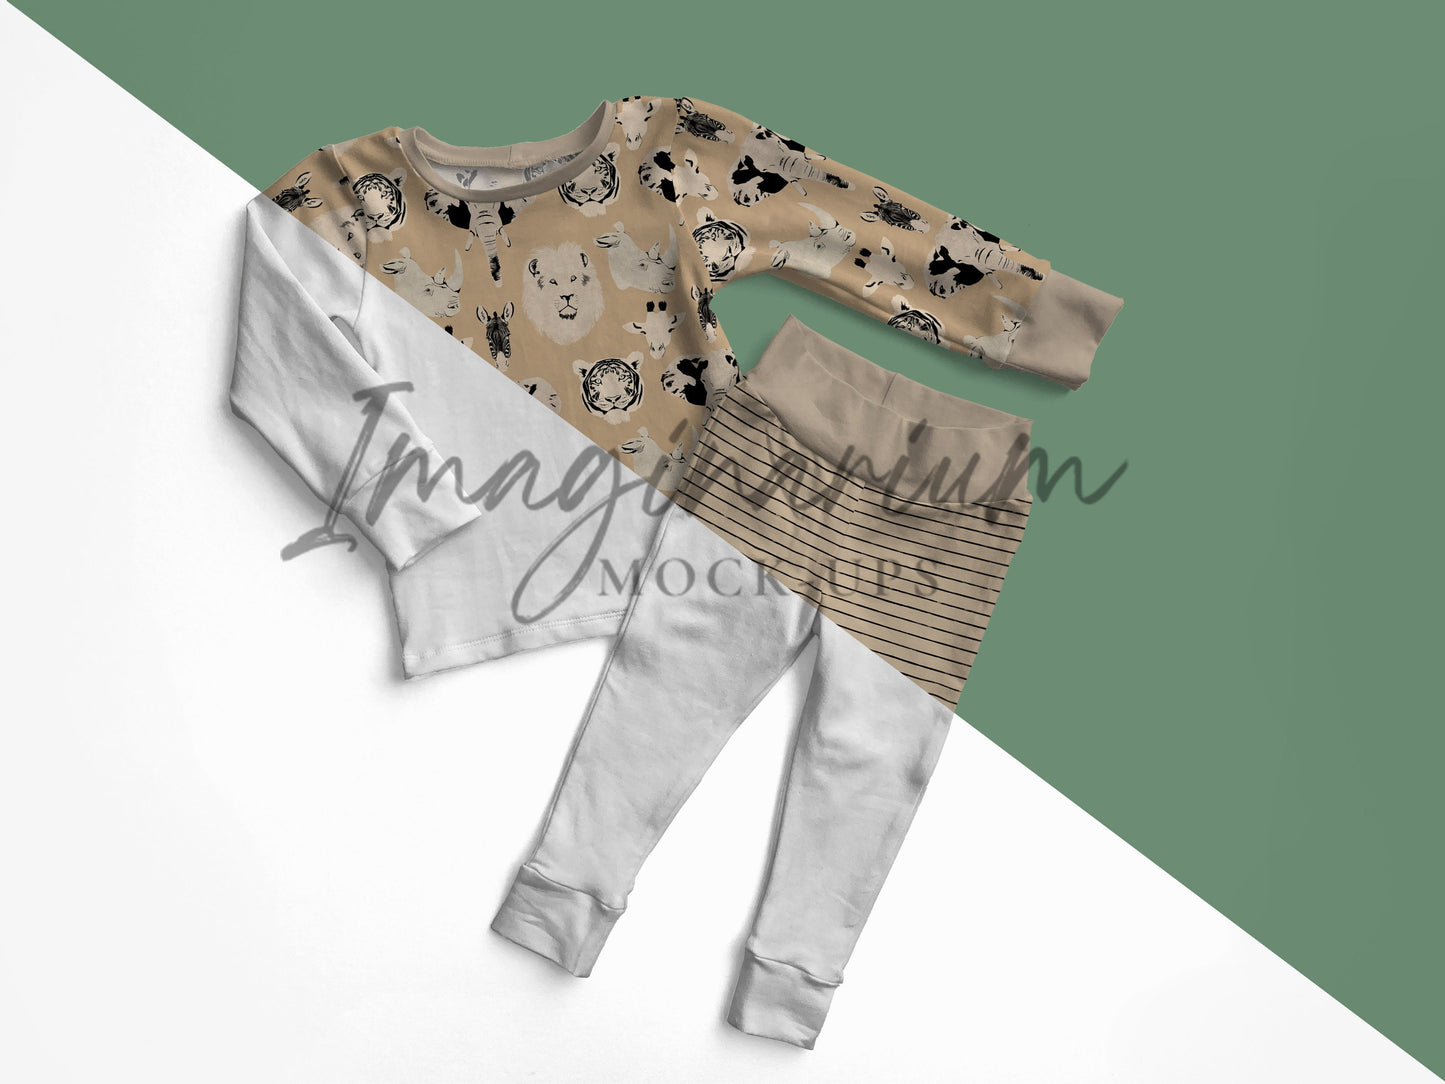 Pajama Top and Yoga Waist Leggings Outfit Mockup, Realistic Clothing Mock Up for Photoshop and Procreate